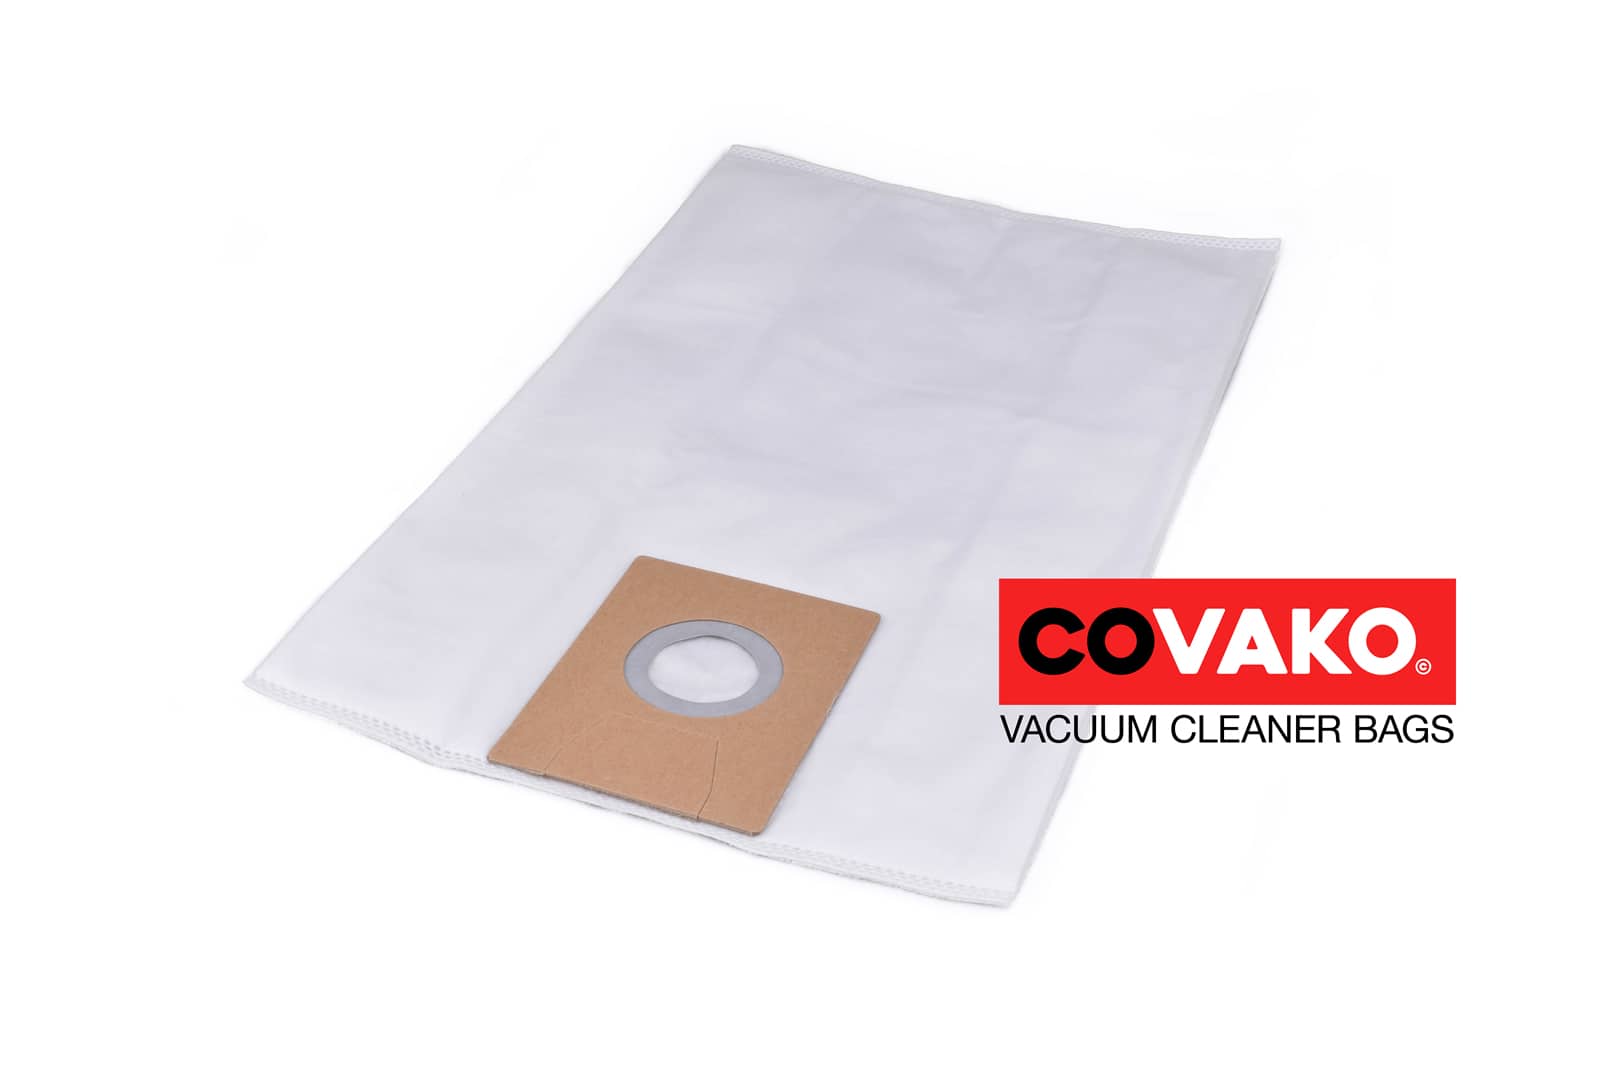 Eurom Force 1420 S wet/dry / Synthesis - Eurom vacuum cleaner bags